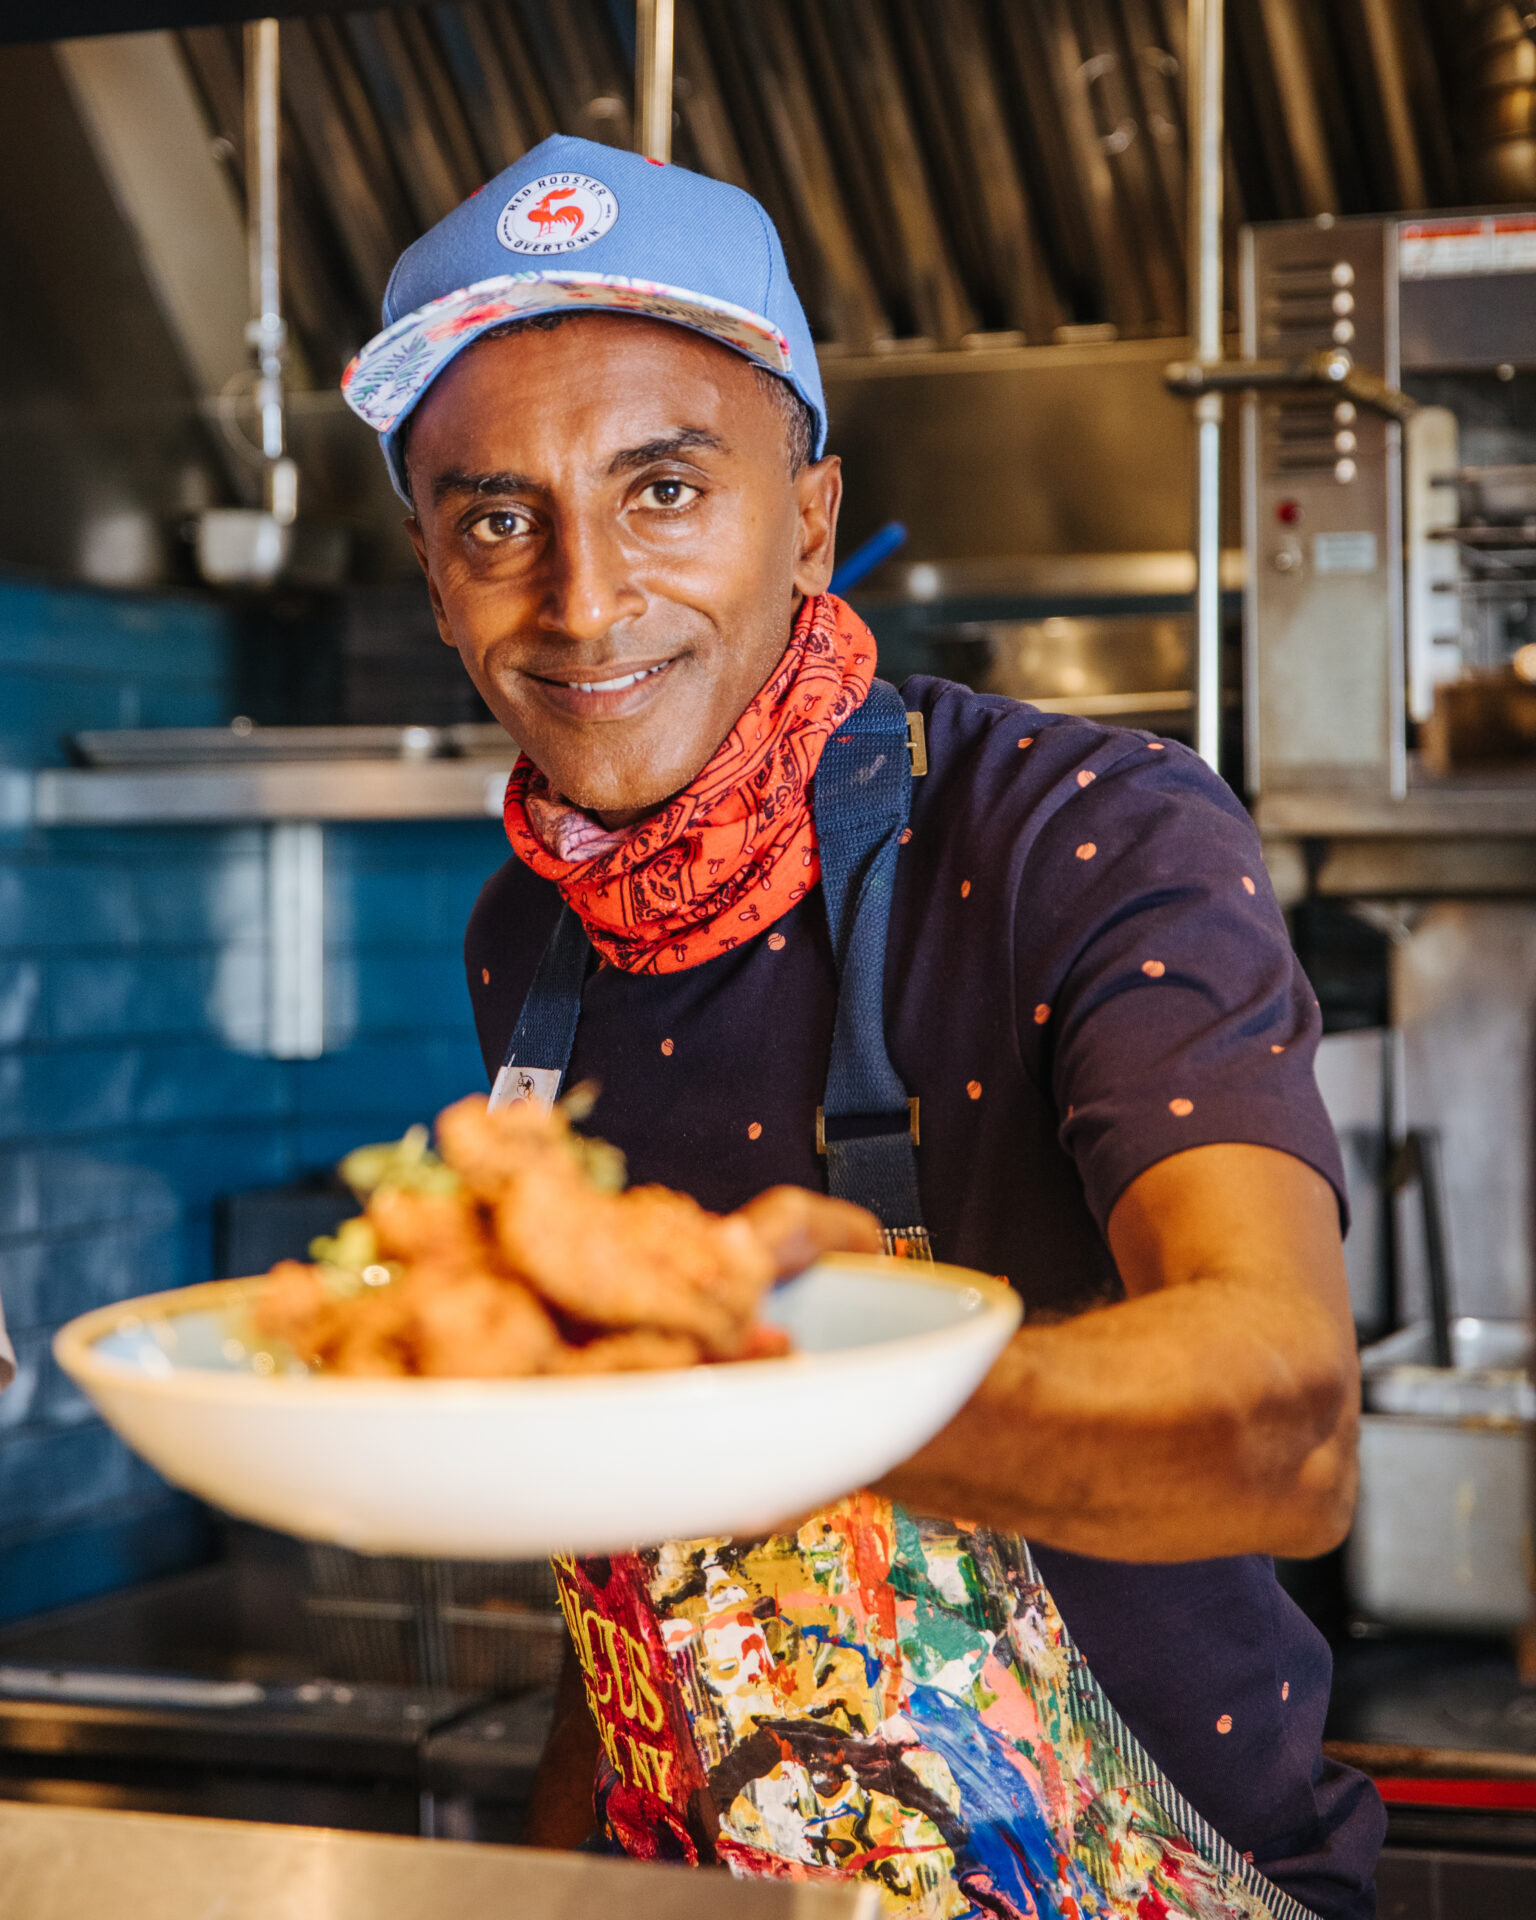 In The Fridge: Chef Marcus Samuelsson holding out a plate of food in a white bowl while standing in his colorful kitchen.